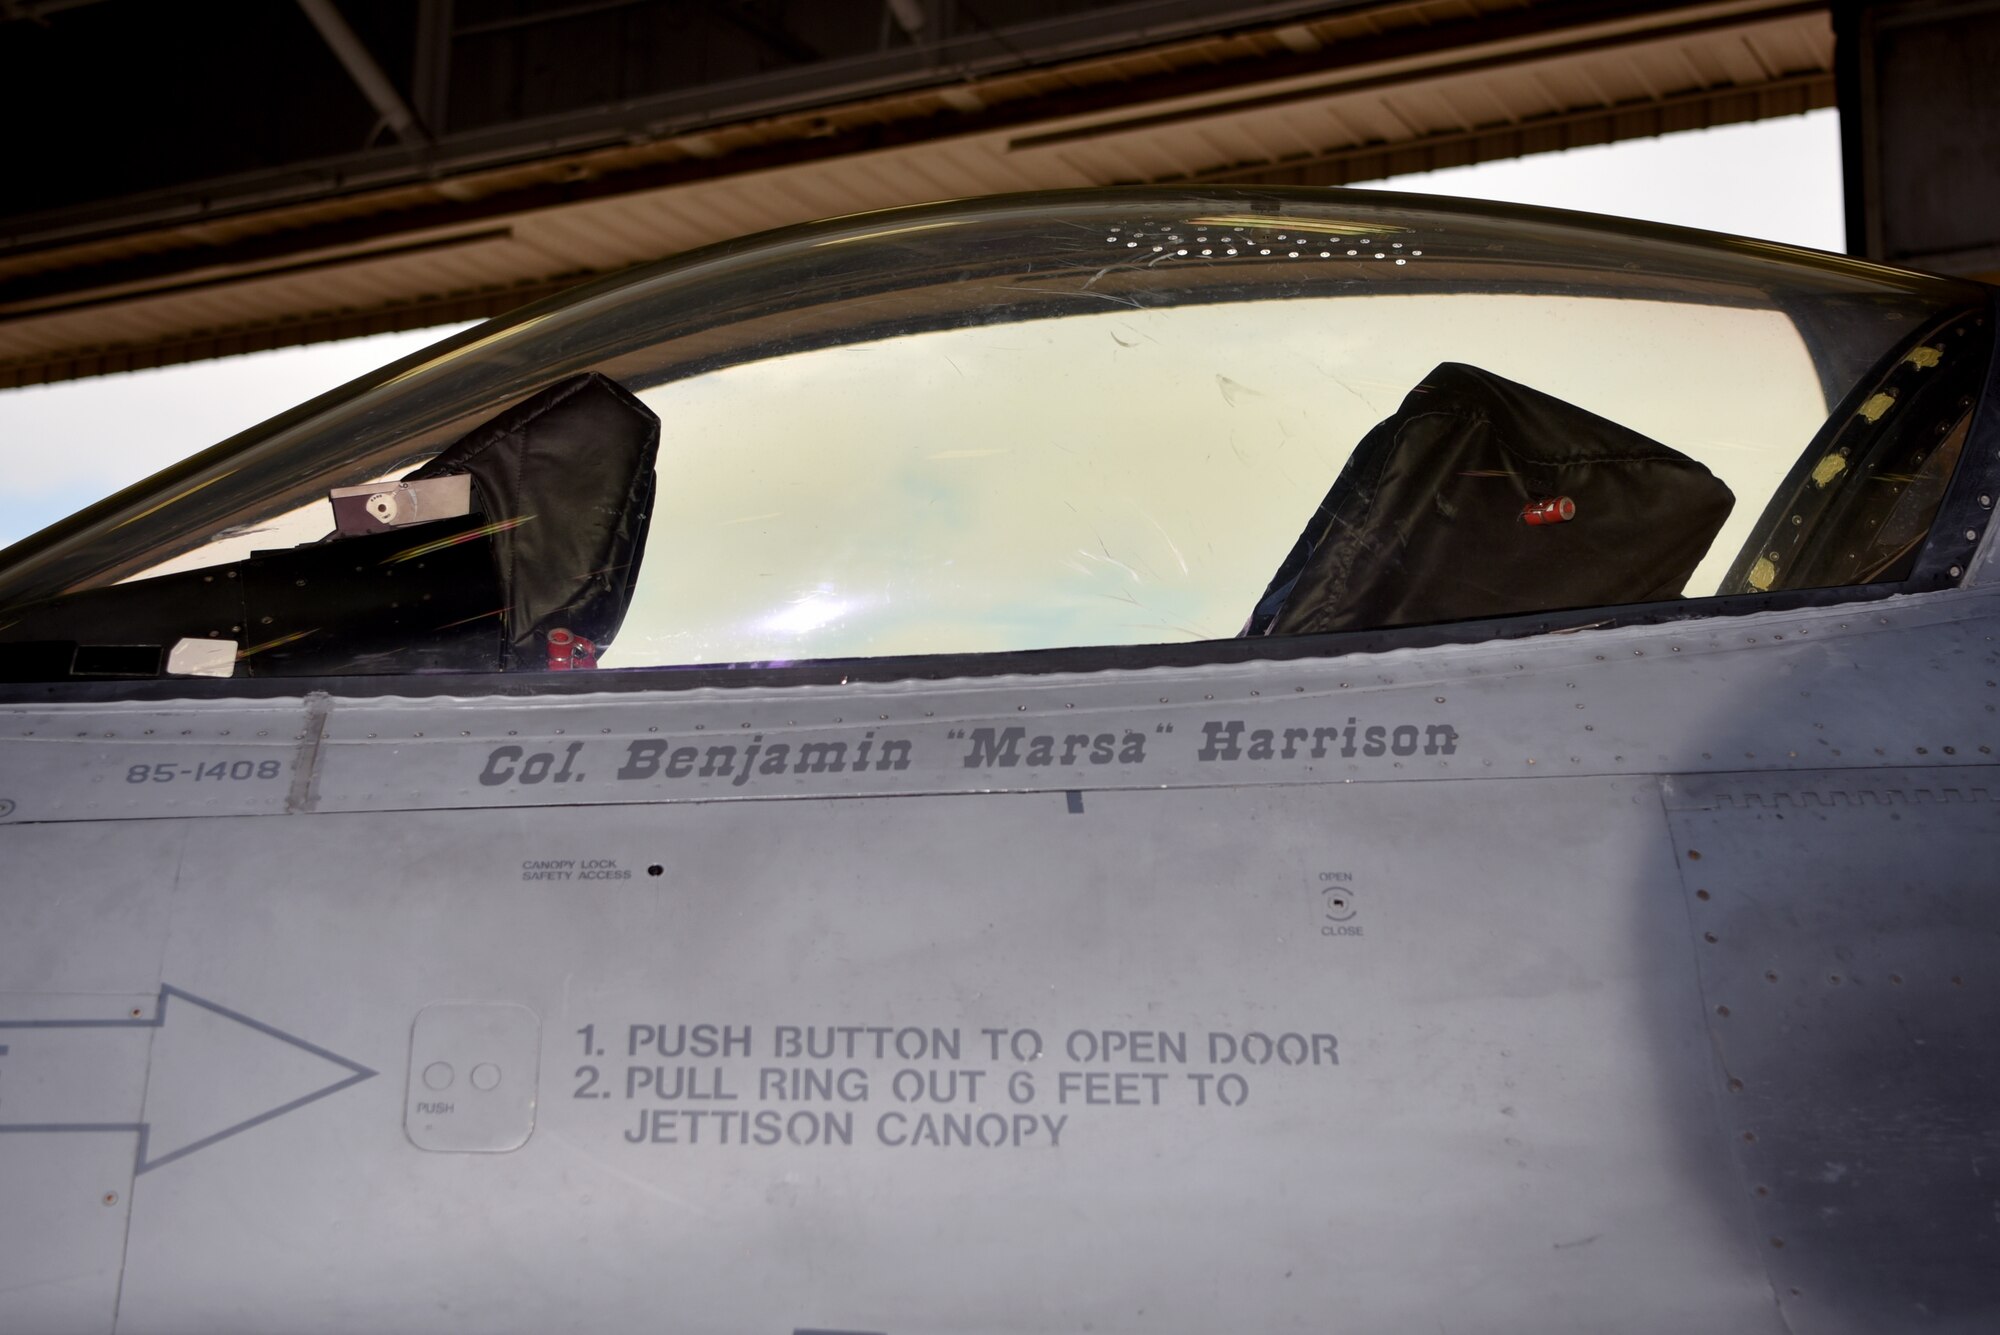 Col. Benjamin “Marsa” Harrison’s, 301st Operations Group commander, name is revealed on an F-16 Fighting Falcon as part of his 301 FW OG change of command ceremony, June 6, 2021, at U.S. Naval Air Station Joint Reserve Base Fort Worth, Texas. Harrison is responsible for the operational aspects and combat deployment of F-16 Fighting Falcon in support of combat commanders and theaters worldwide. (U.S. Air Force photo by Staff Sgt. Randall Moose)